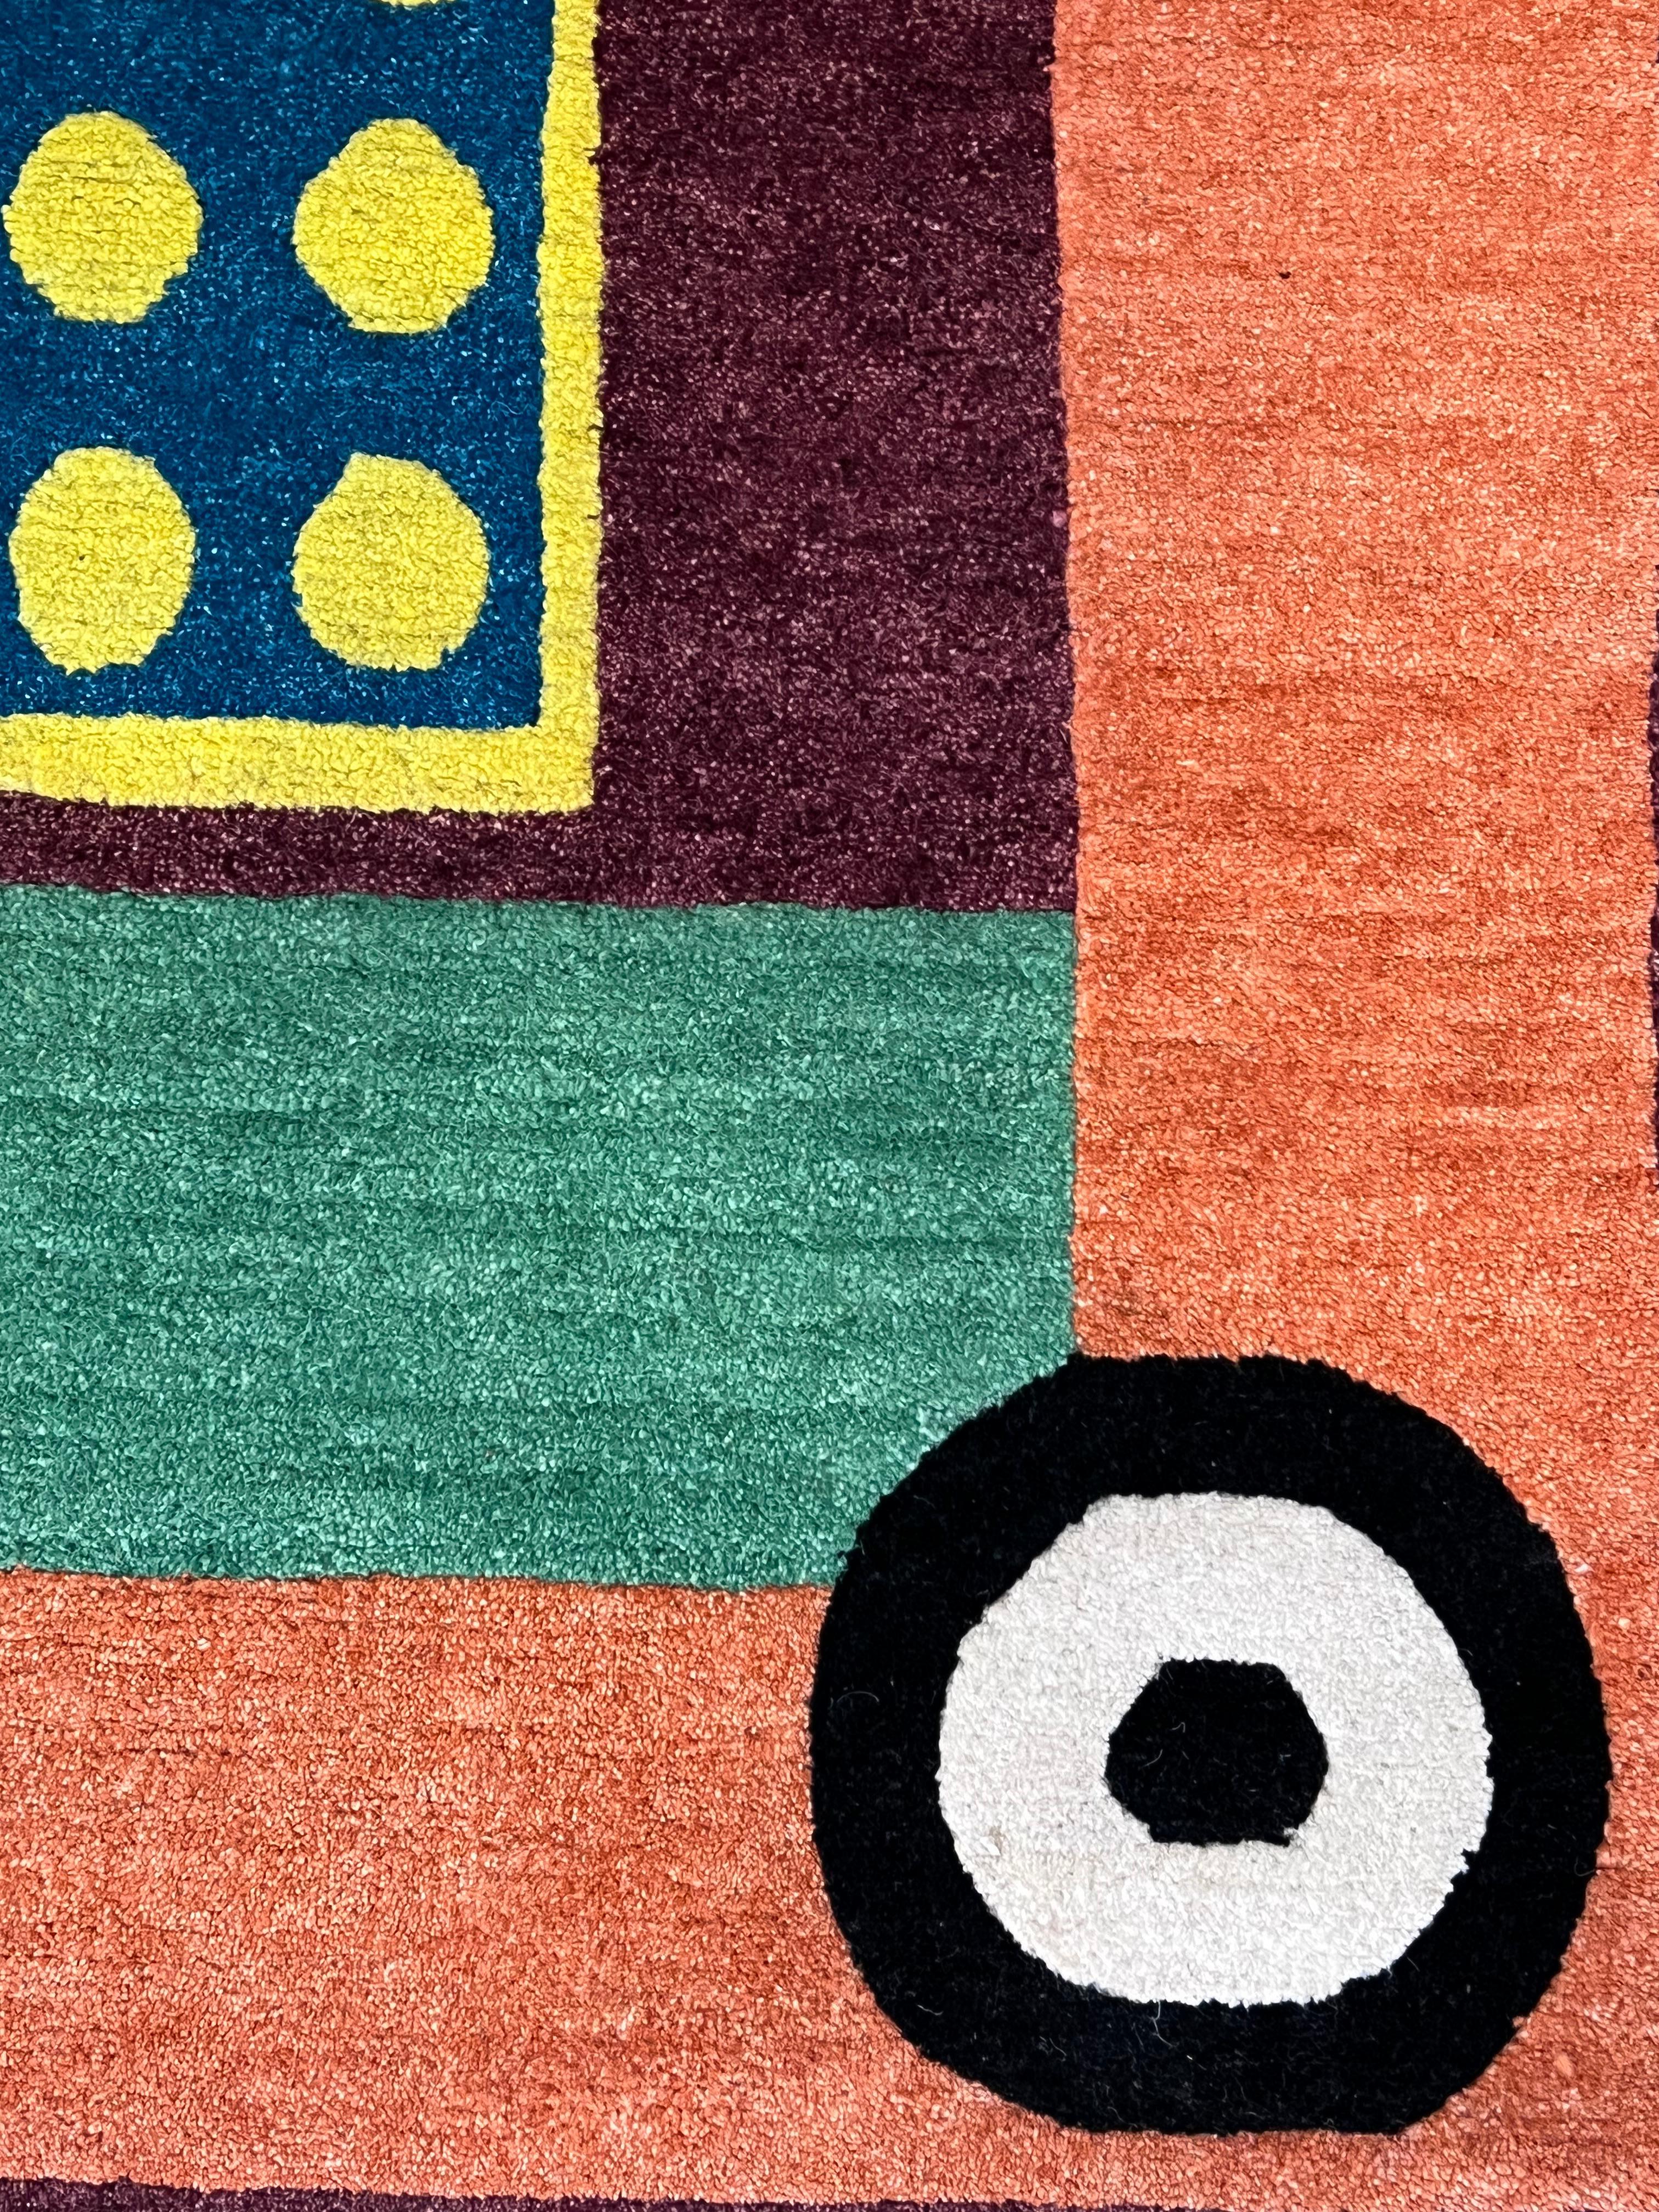 Hand-knotted carpet in Nepal, published by Galleria Post Desig in Milan and designed by Nathalie Du Pasquier. Number 12 of a limited production of 36 pieces that appears in the catalog Collection of carpets 